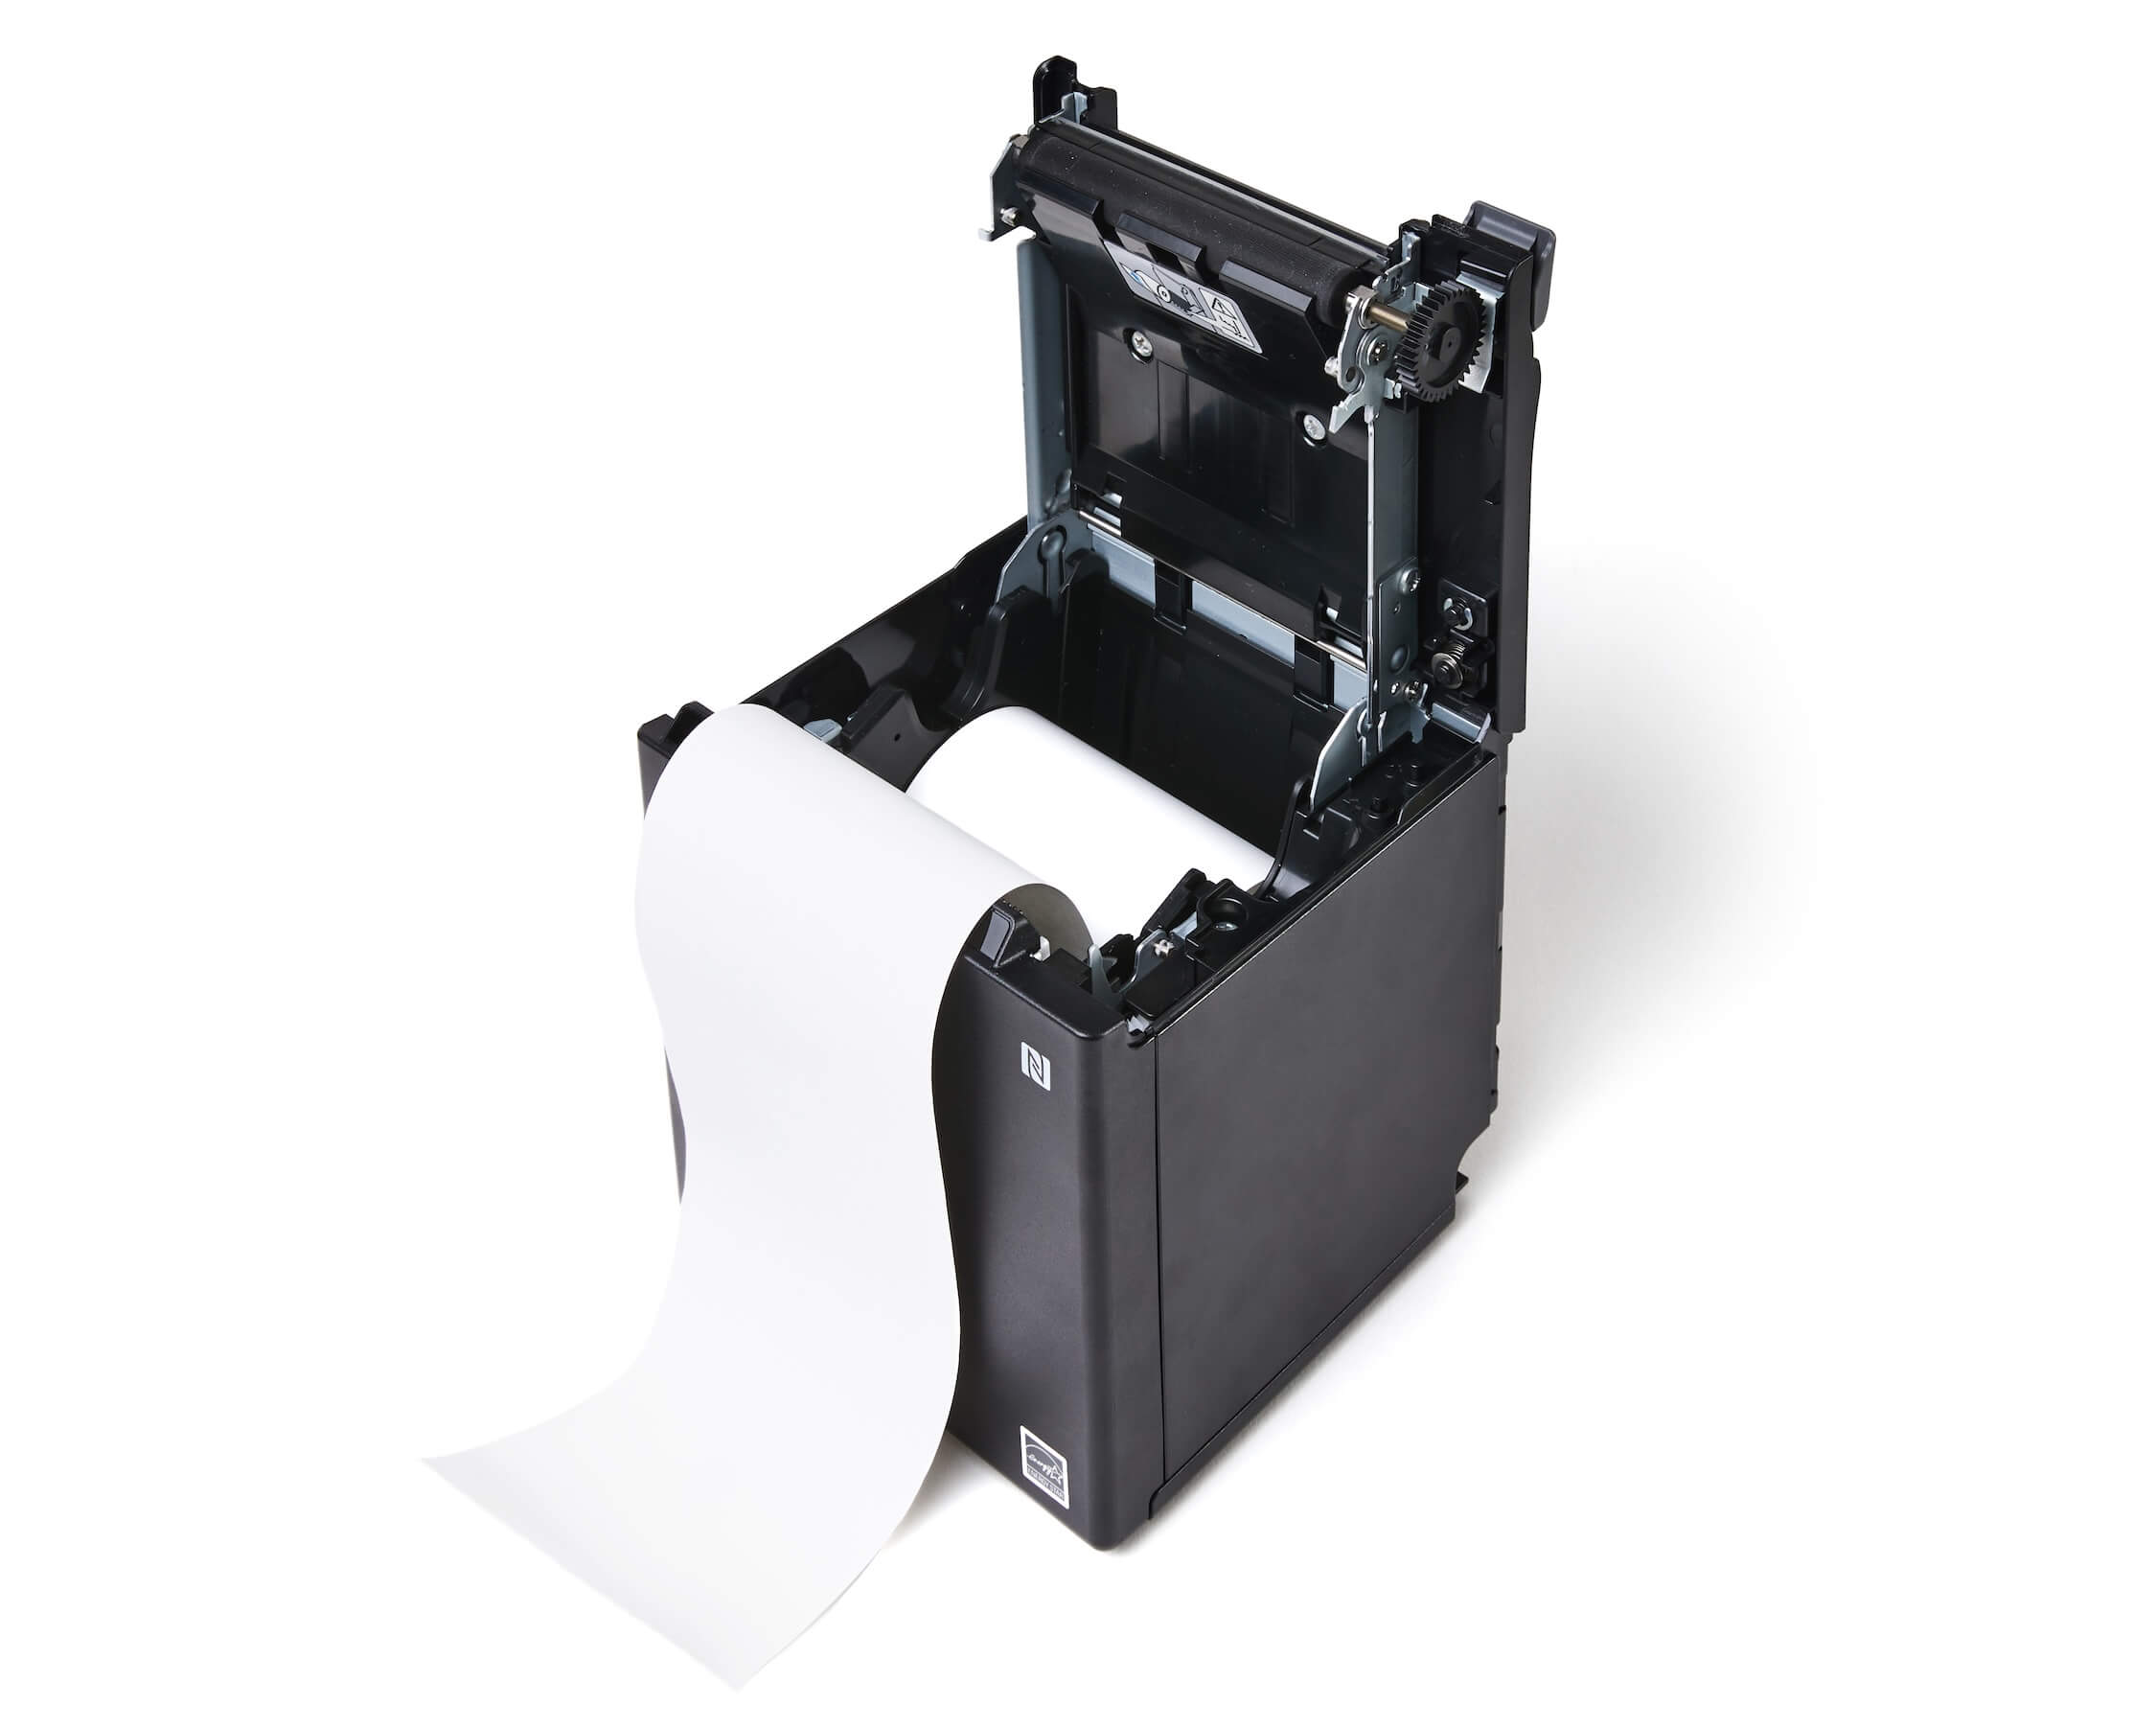 TM-m30II printer with paper loaded and cover open.